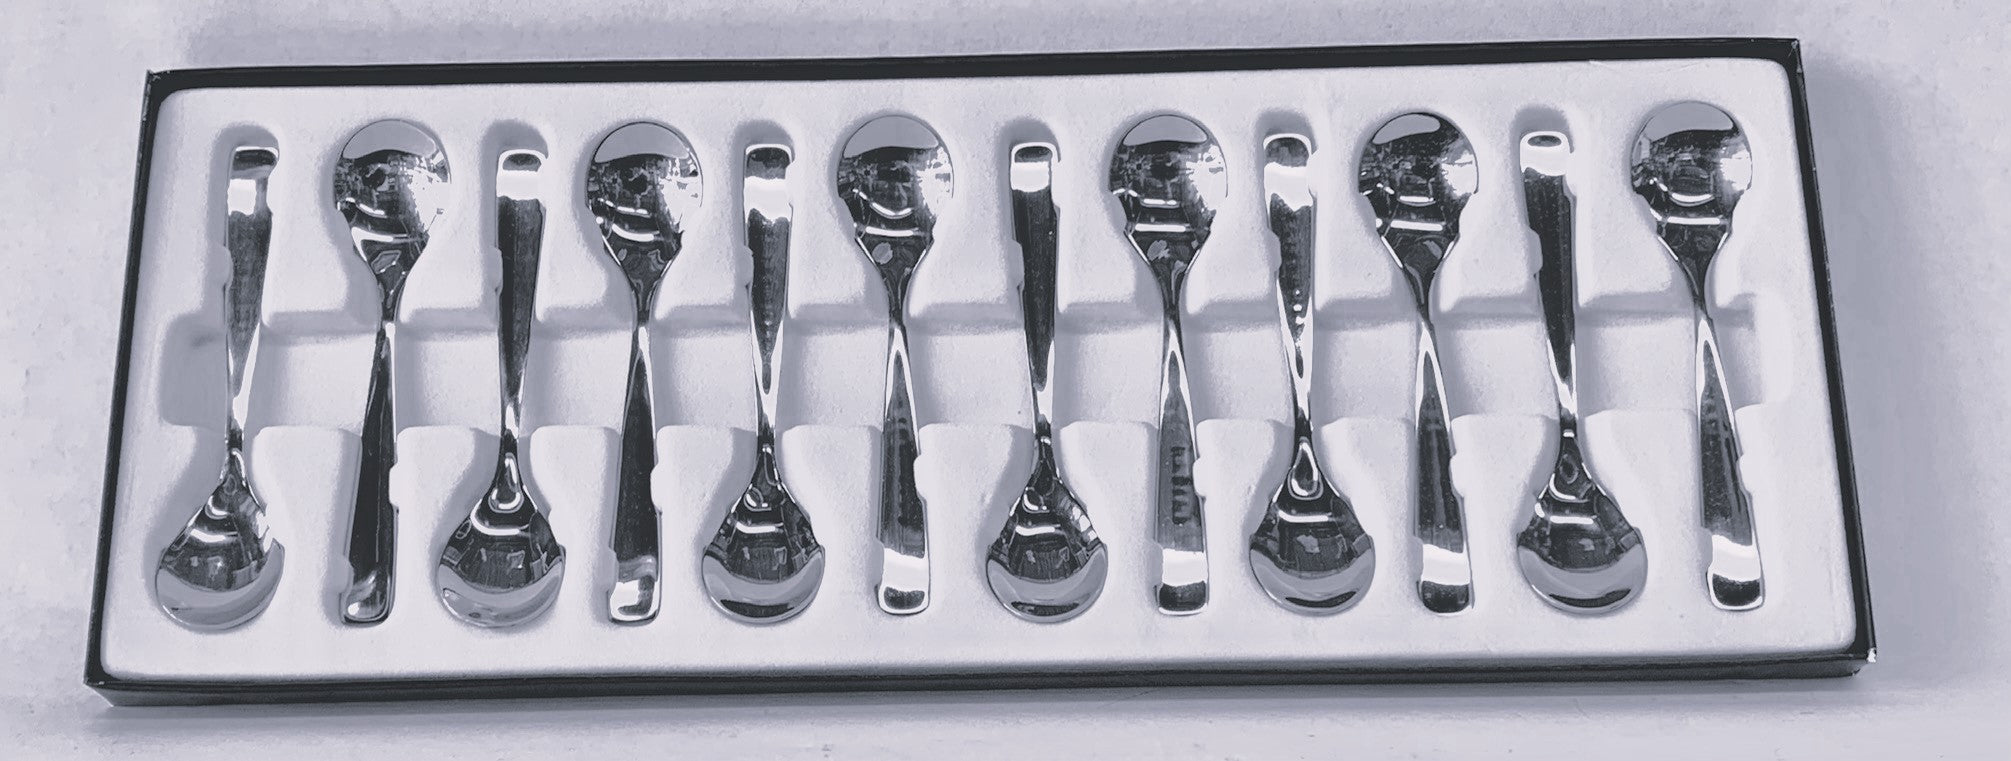 Espresso Spoons 12 piece Set 18/10 Stainless Steel.